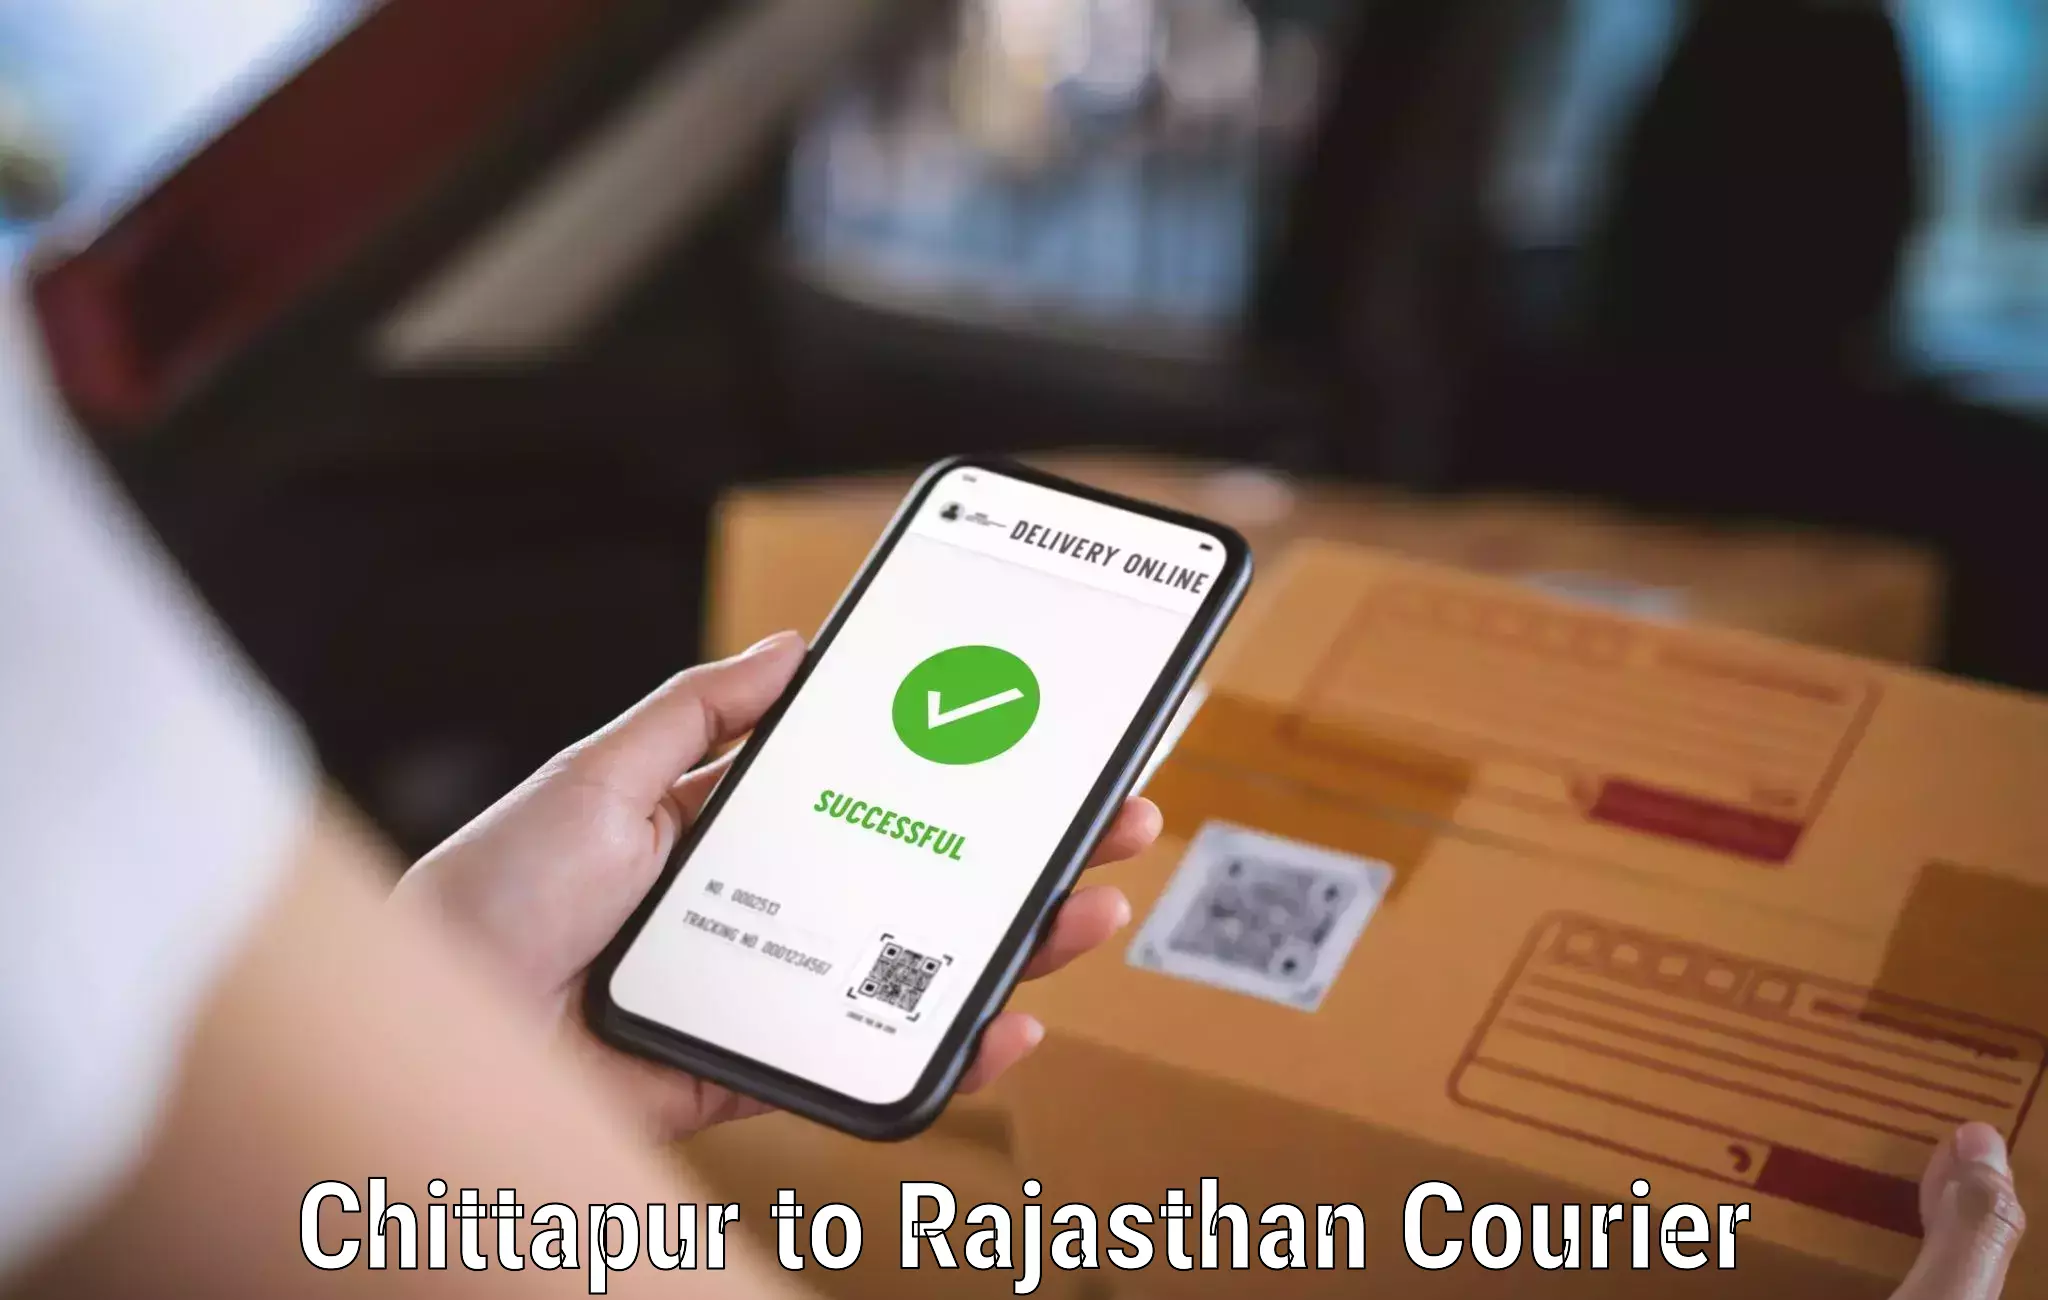 Urban courier service Chittapur to Rajasthan